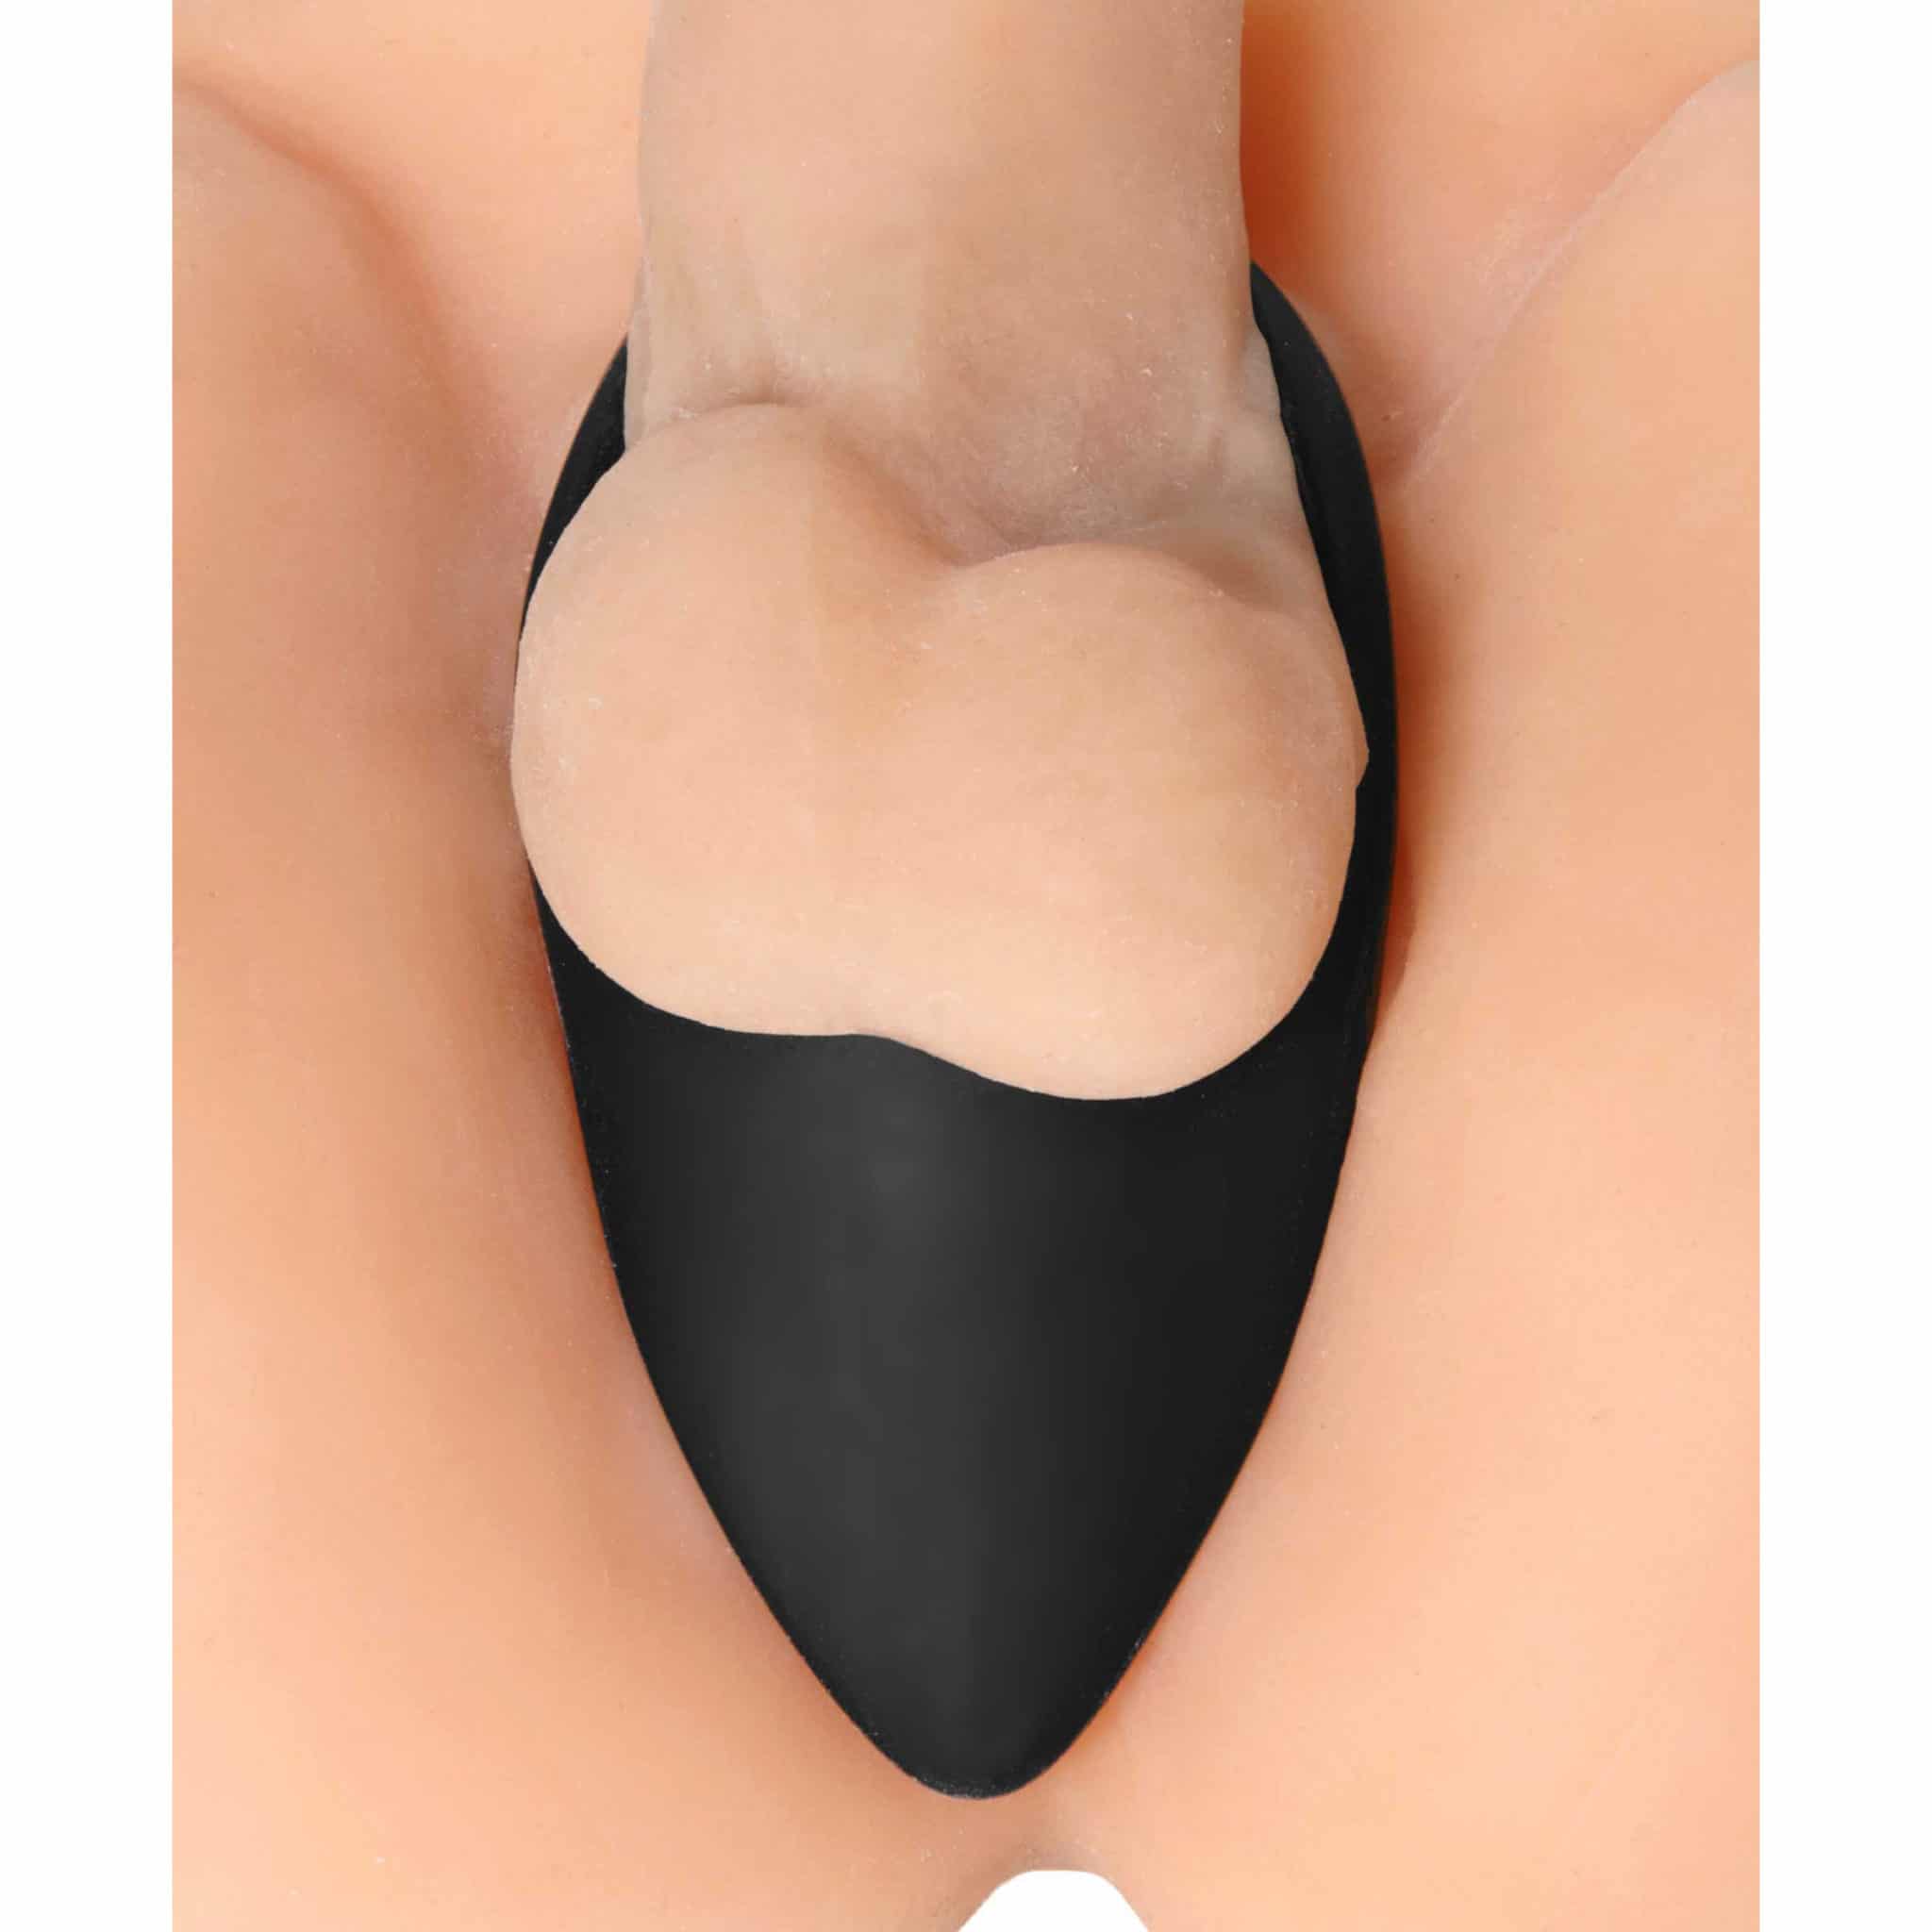 Taint Teaser Silicone Cock Ring and Taint Stimulator - 2 Inch-7